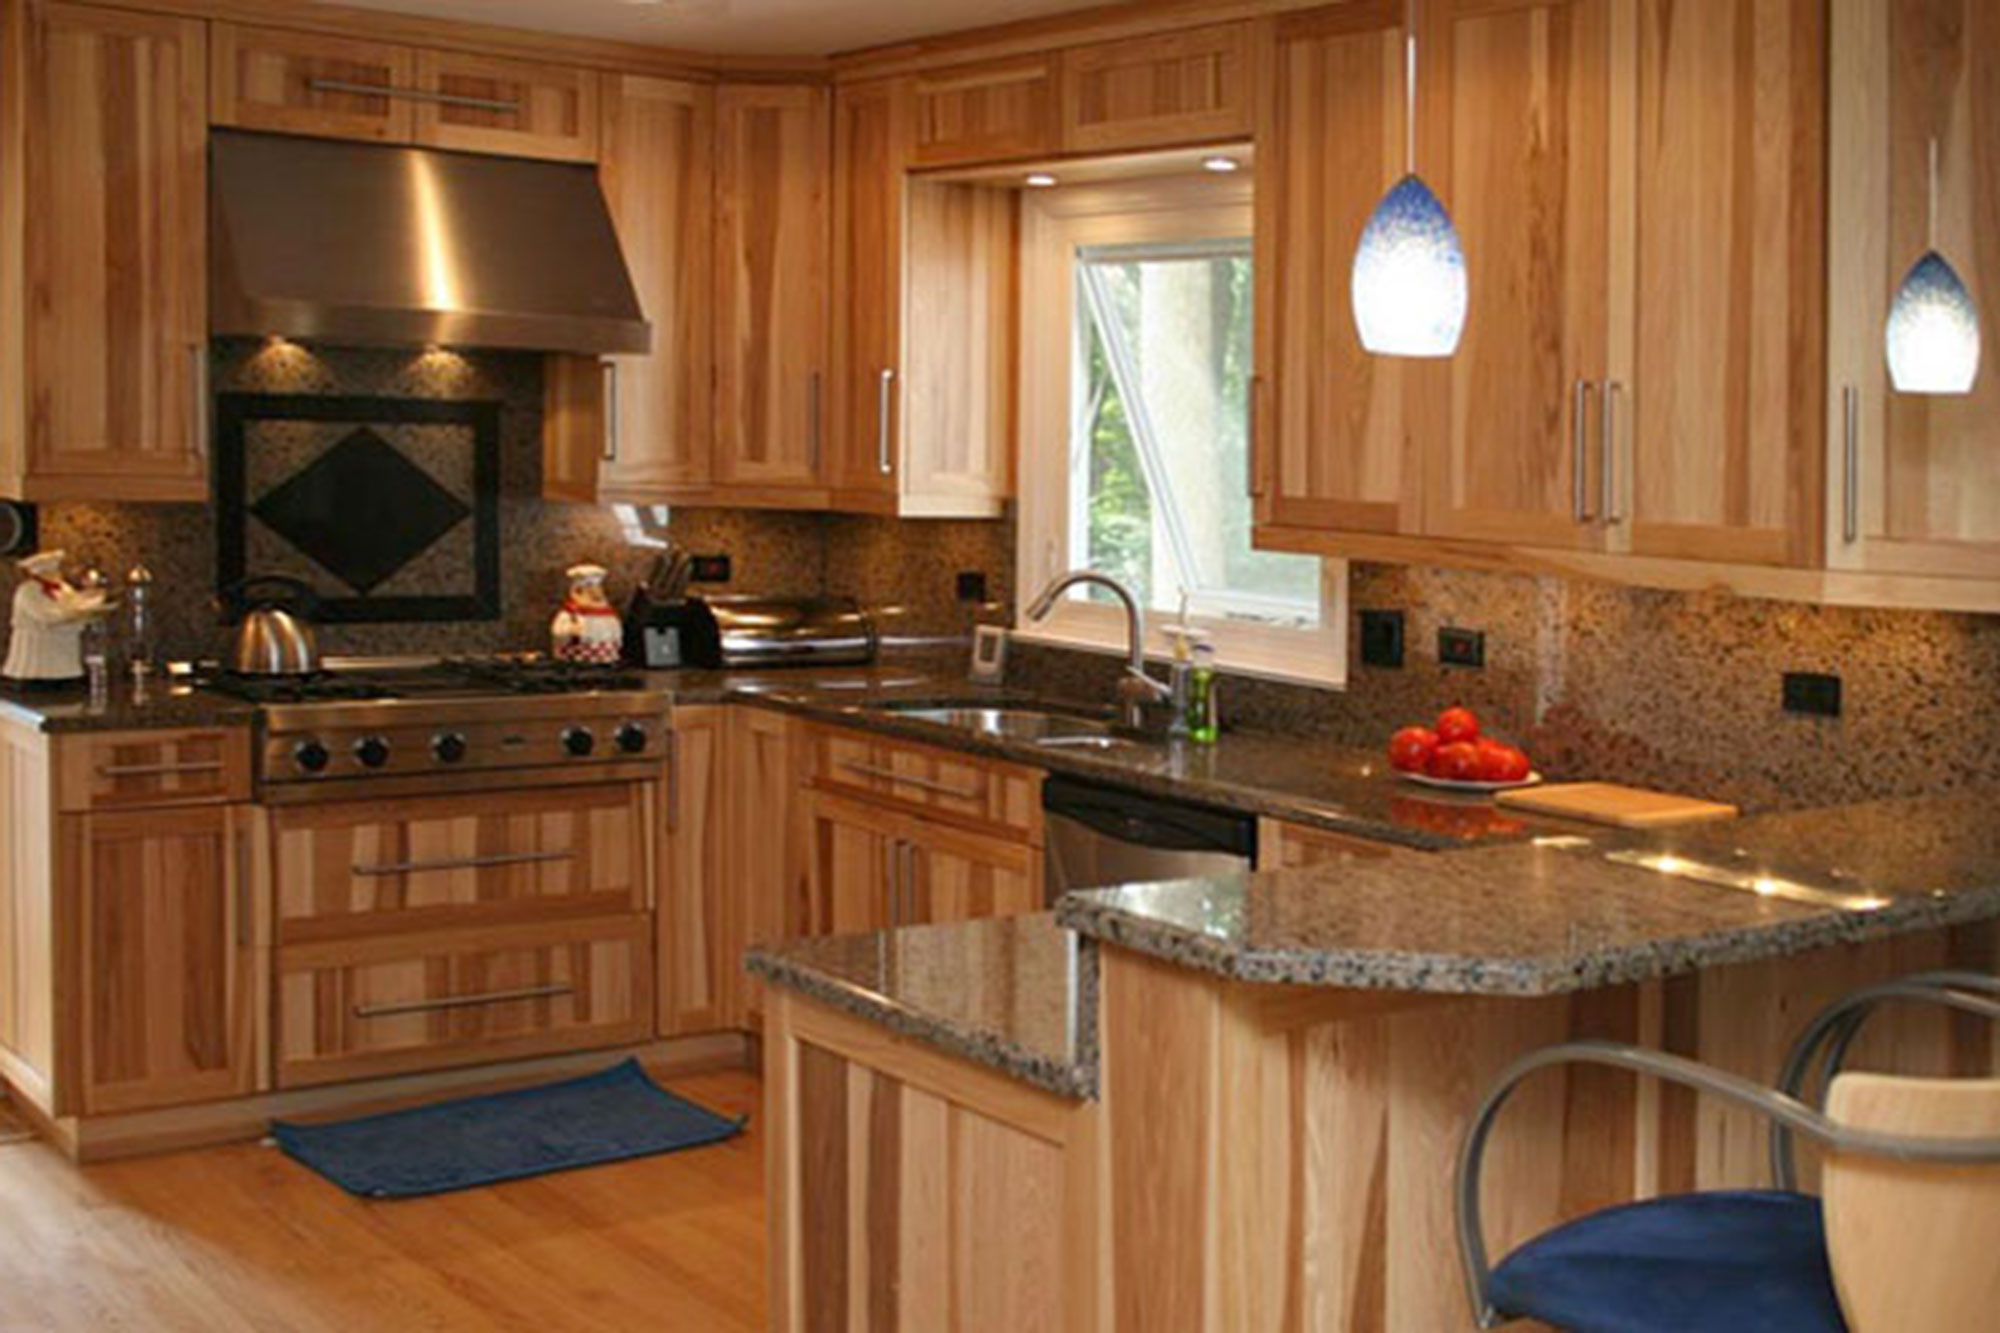 Gallery – Kitchen and Bathroom Cabinets | Kitchen Cabinets, Bath Cabinets